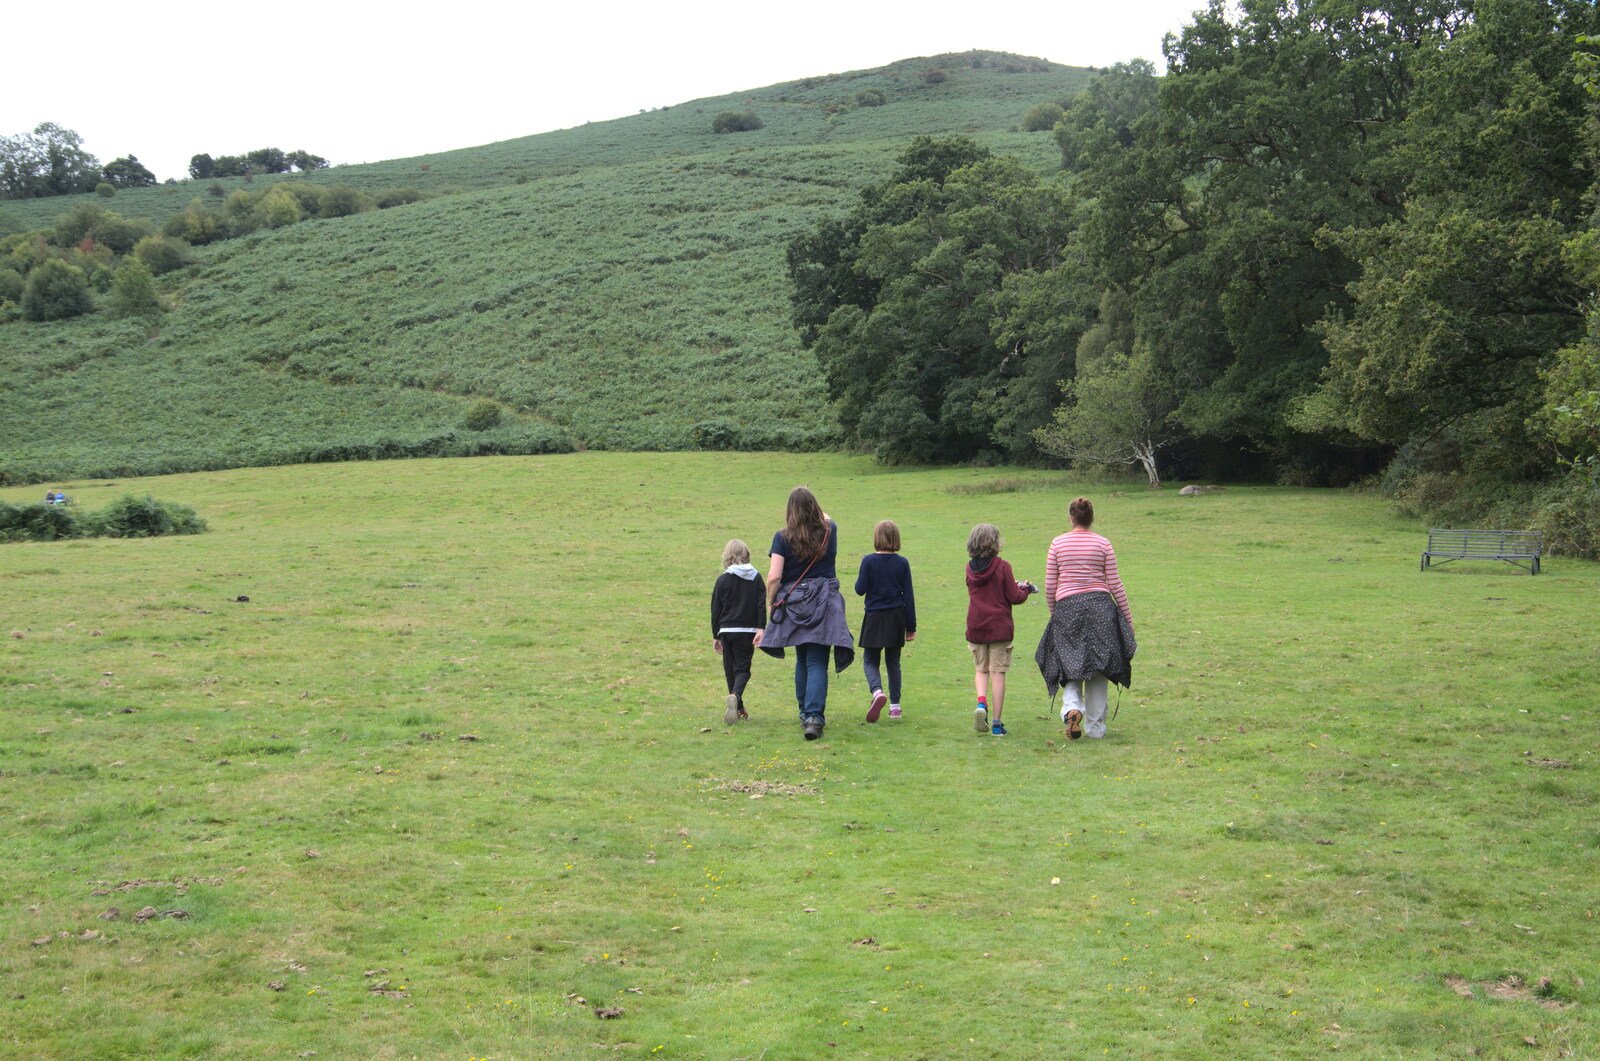 We wander off around the bottom of Meldon Hill from A Game of Cricket, and a Walk Around Chagford, Devon - 23rd August 2020